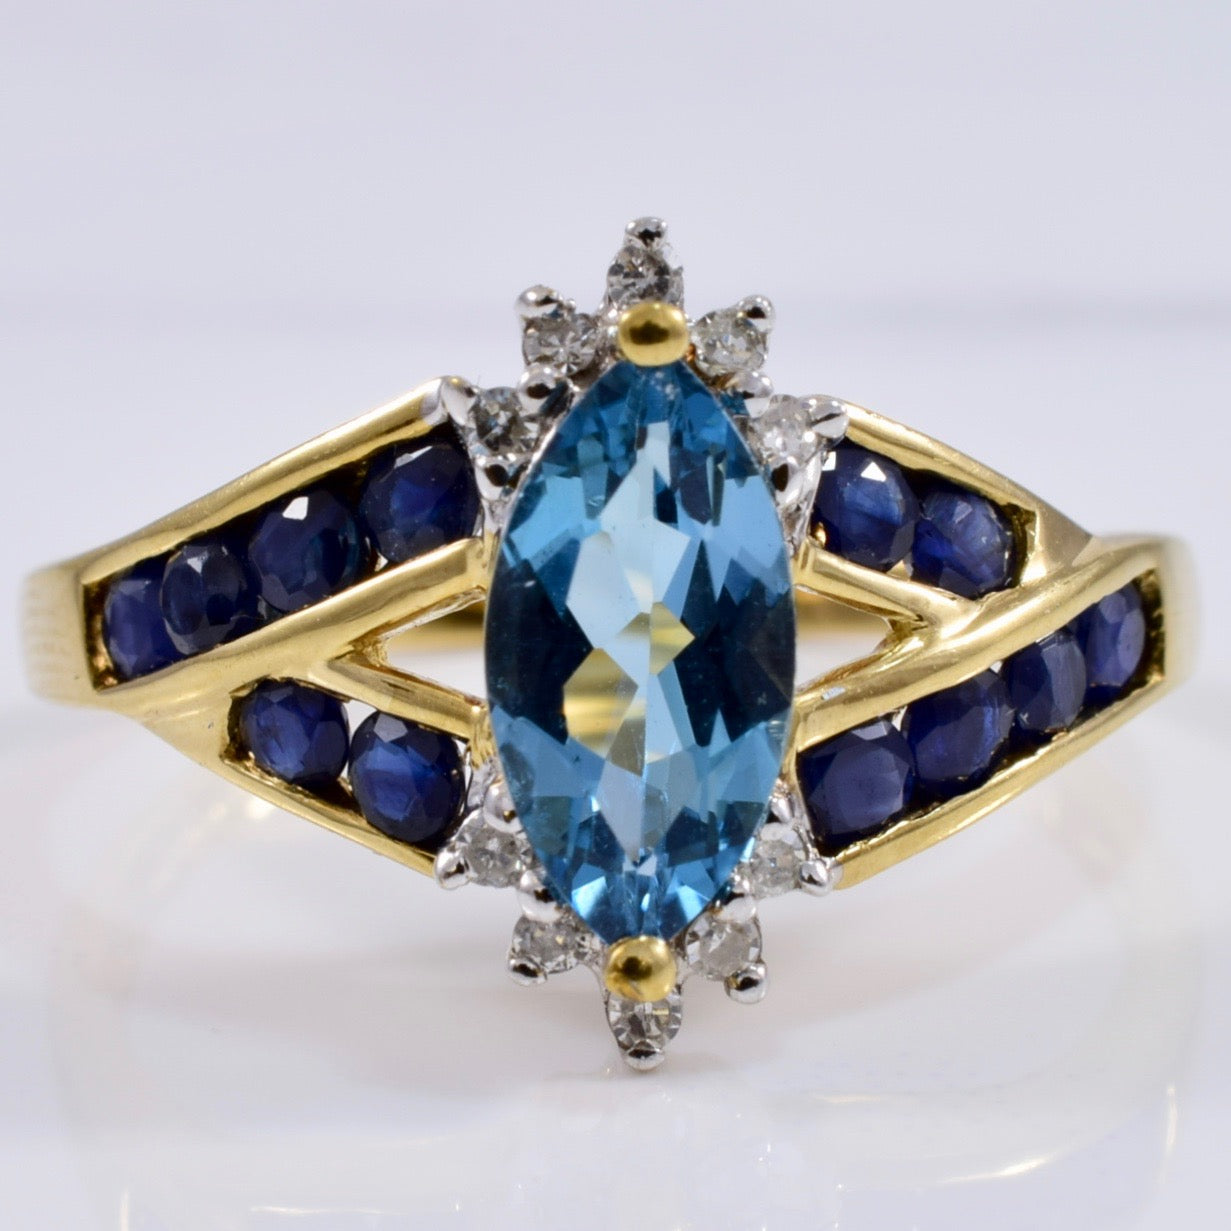 London Blue Topaz Ring with Accent Sapphires and Diamonds | 0.09 ctw SZ 9 |